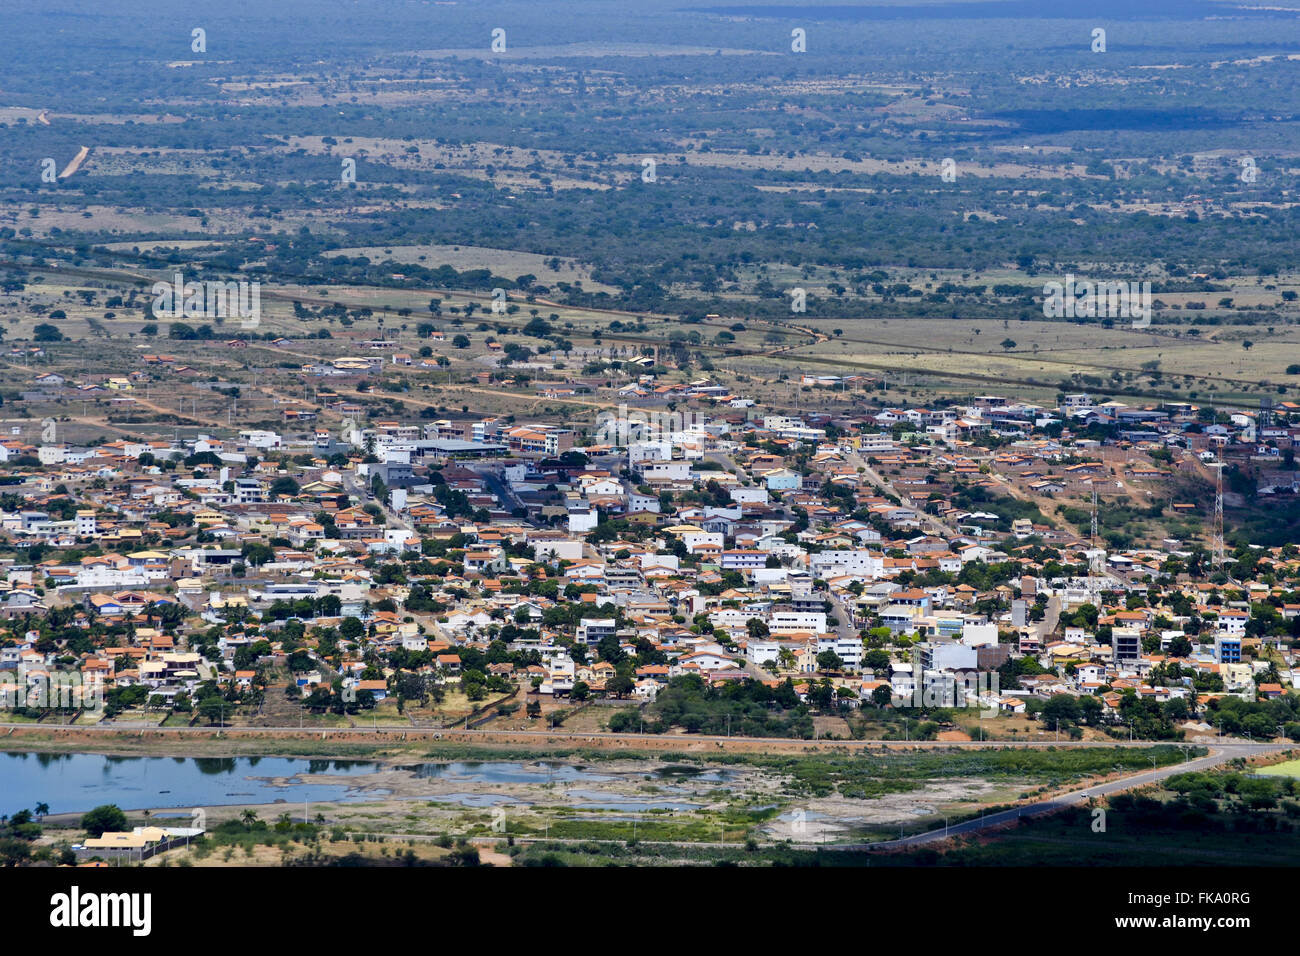 Aerial view of the city with scrub vegetation of the background Stock Photo